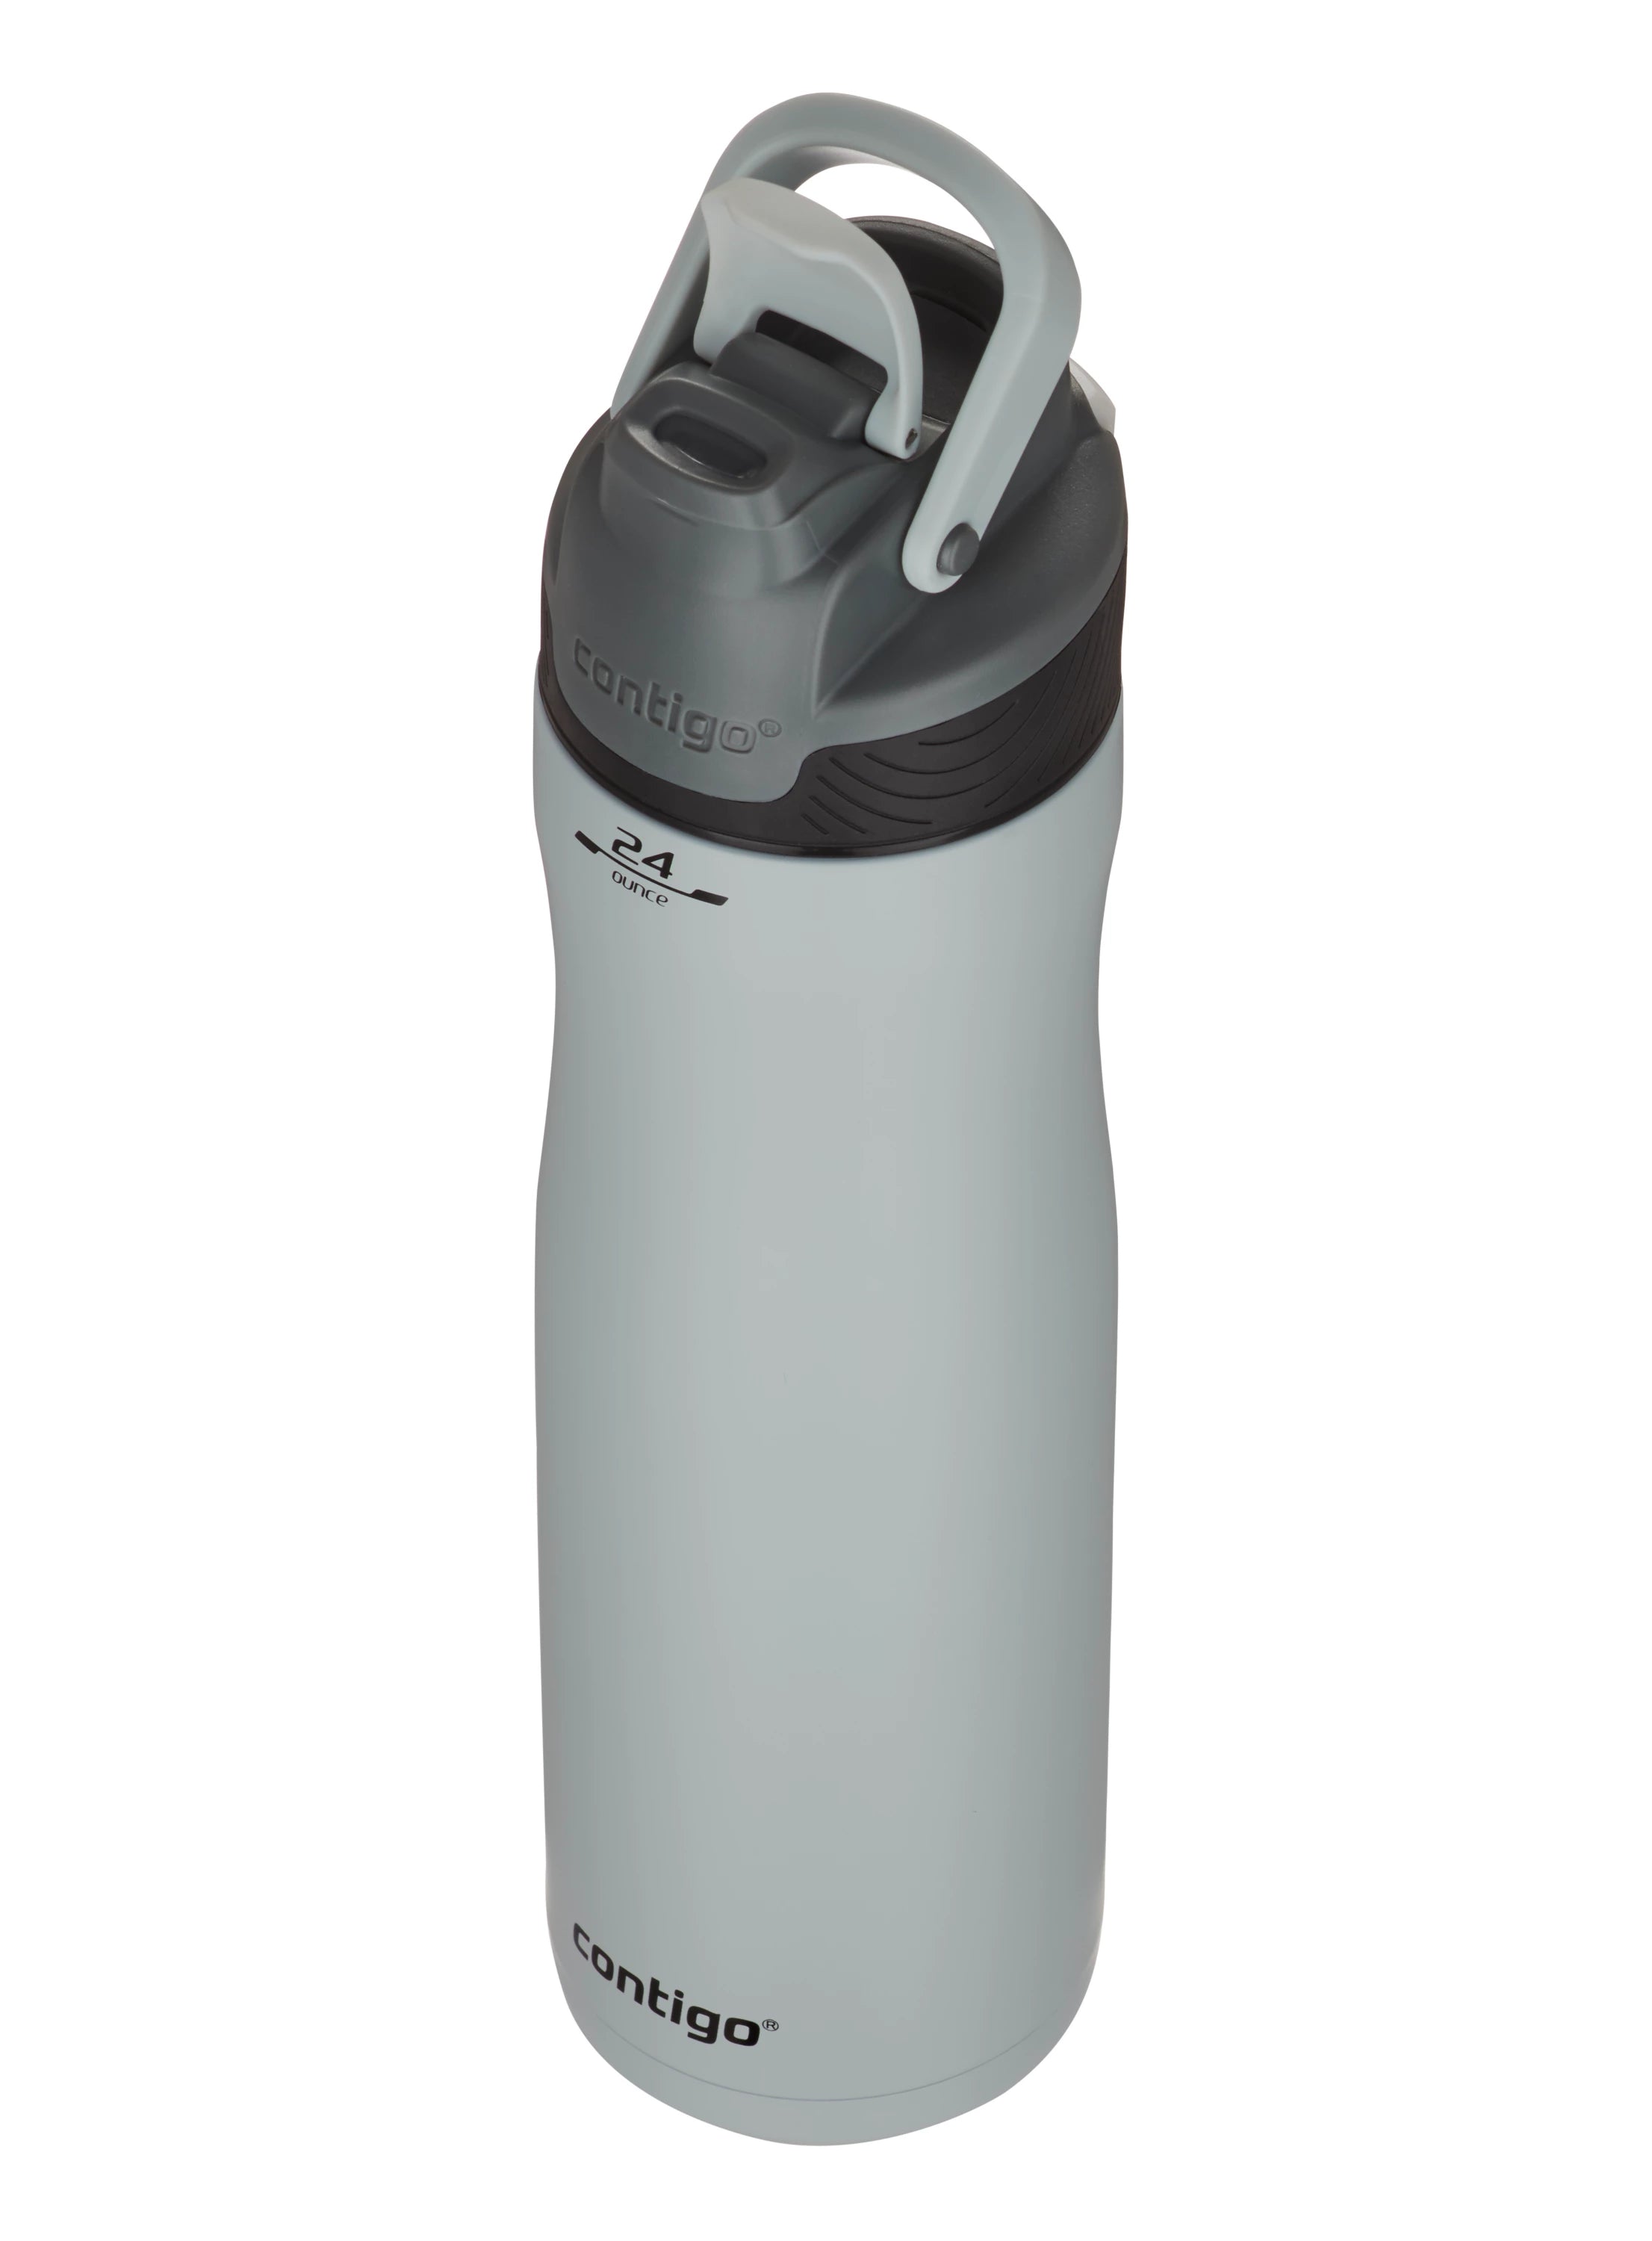 Contigo Autoseal Chill Vacuum Insulated Stainless Steel Water Bottle 720 ml